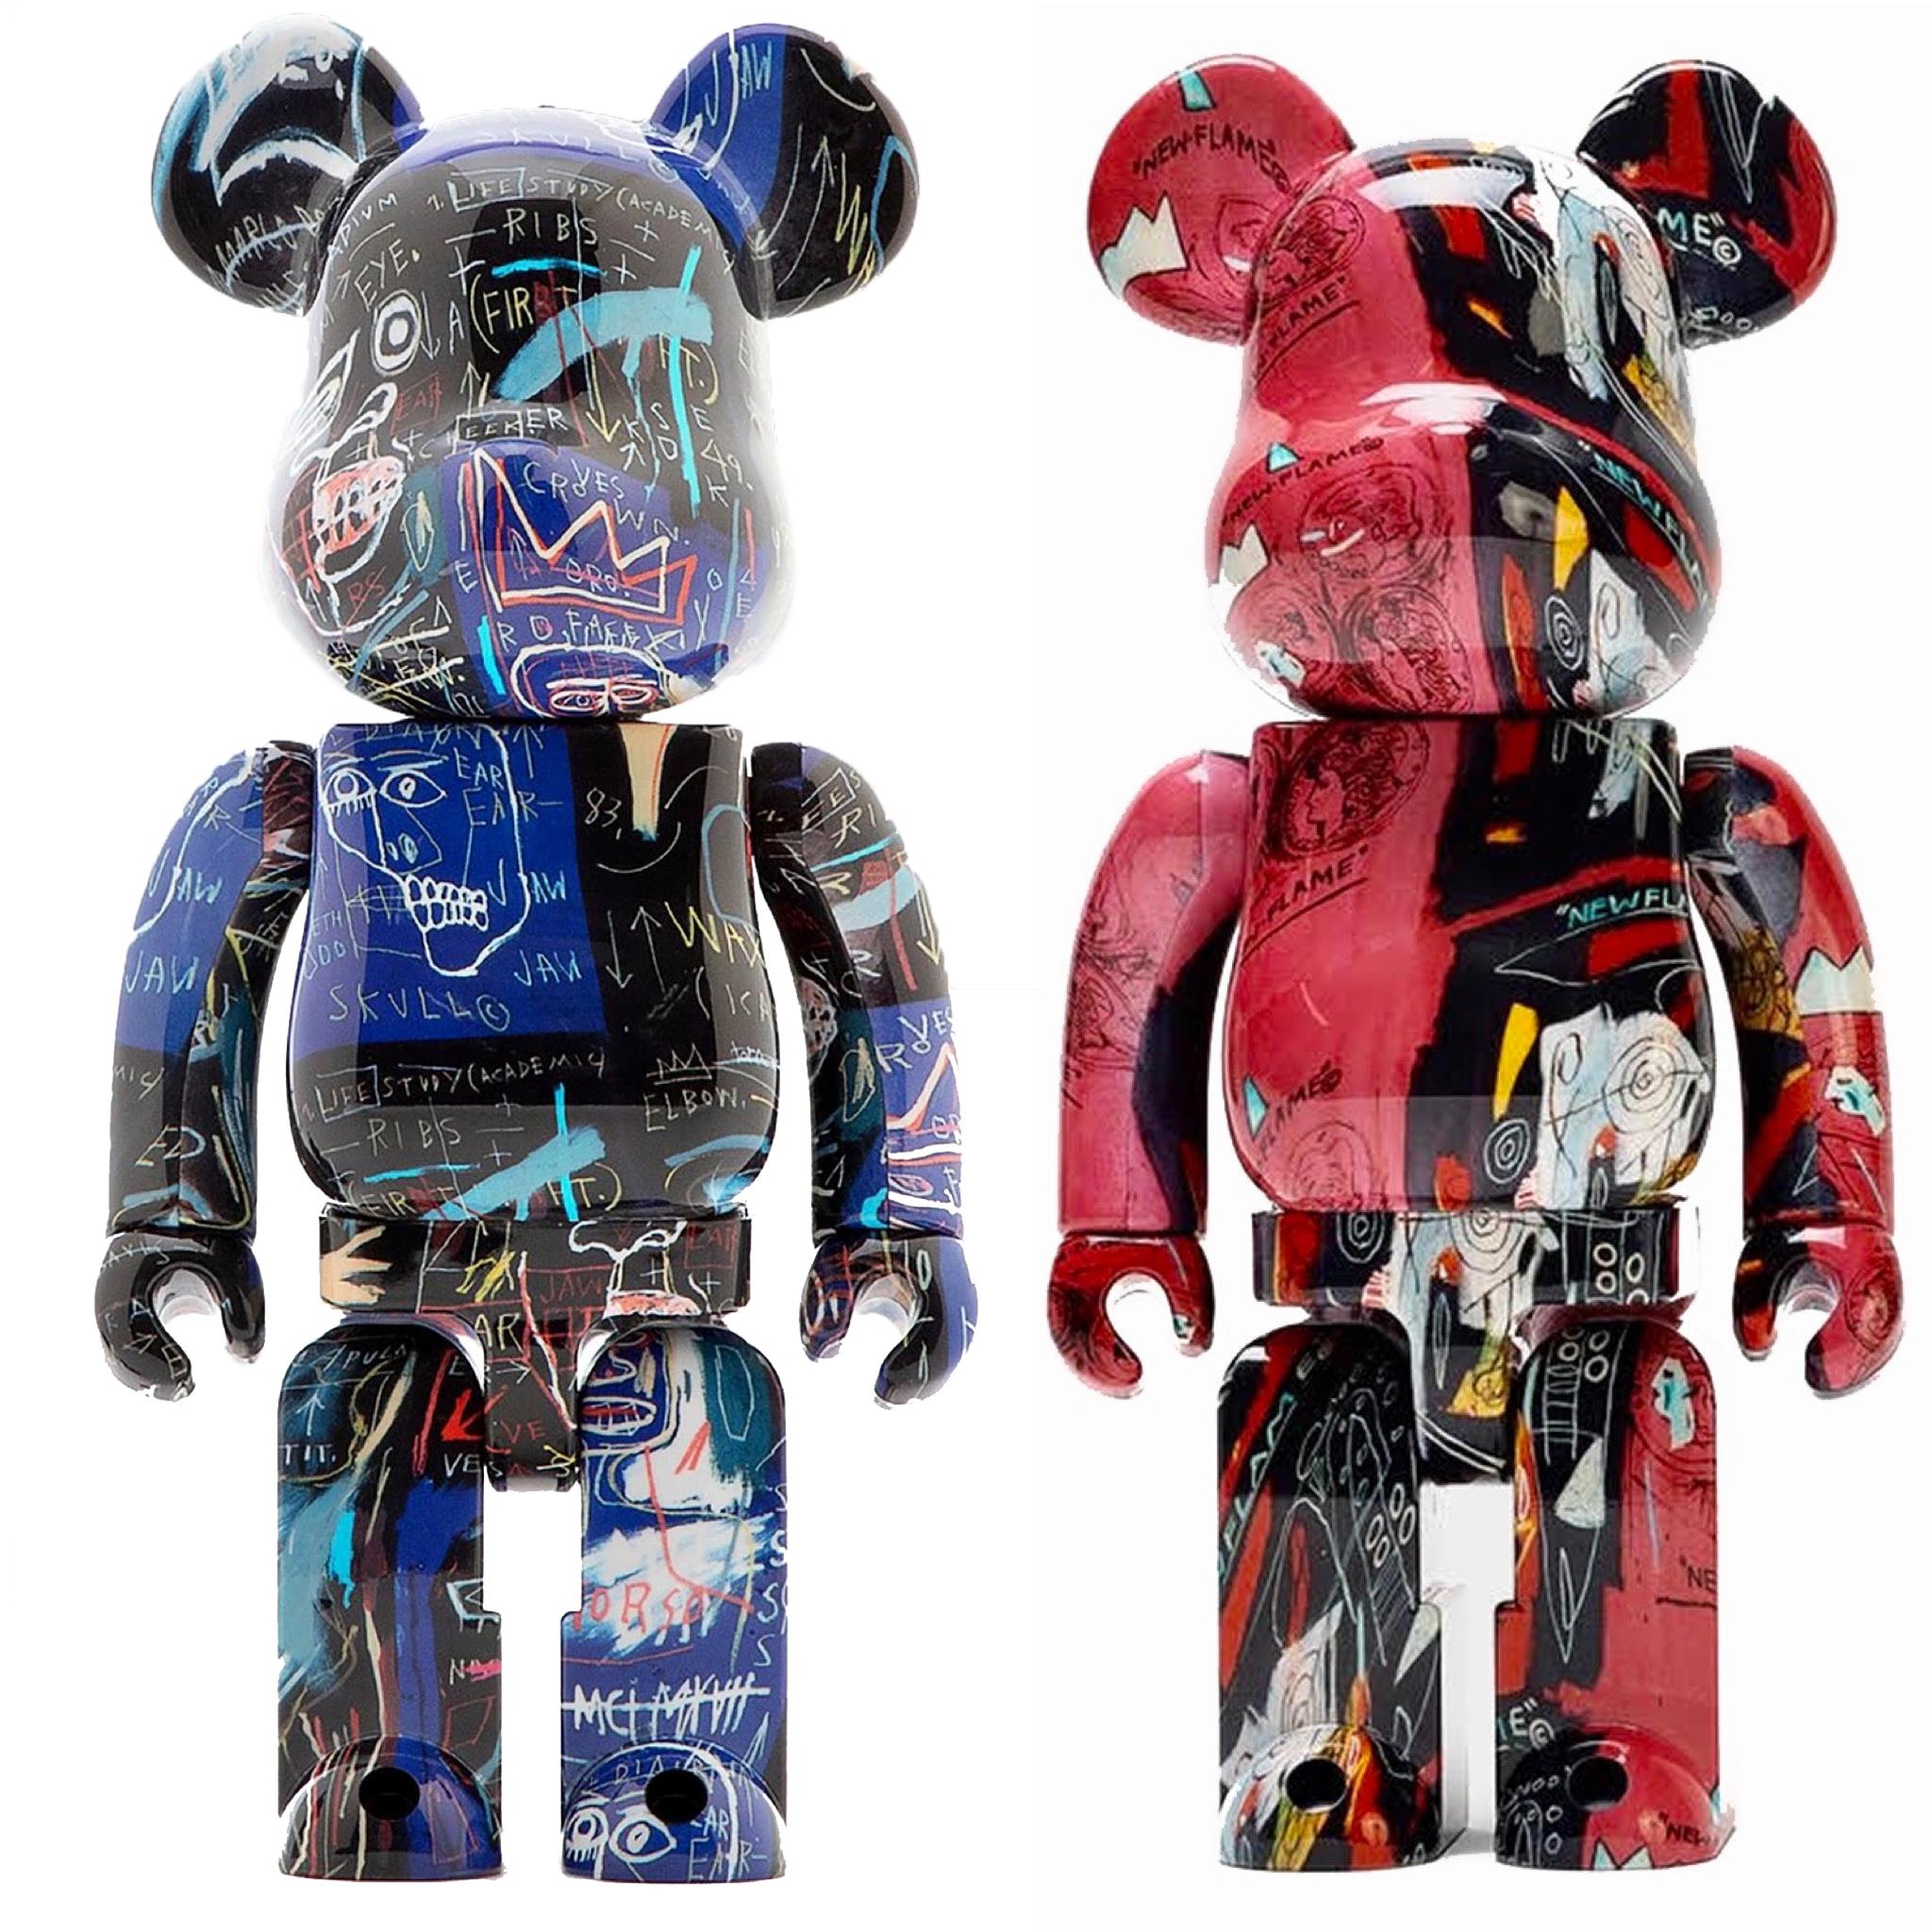 Be@rbrick x Warhol and Basquiat Estates 400% and 100%, set of 2 works - Art by Jean-Michel Basquiat